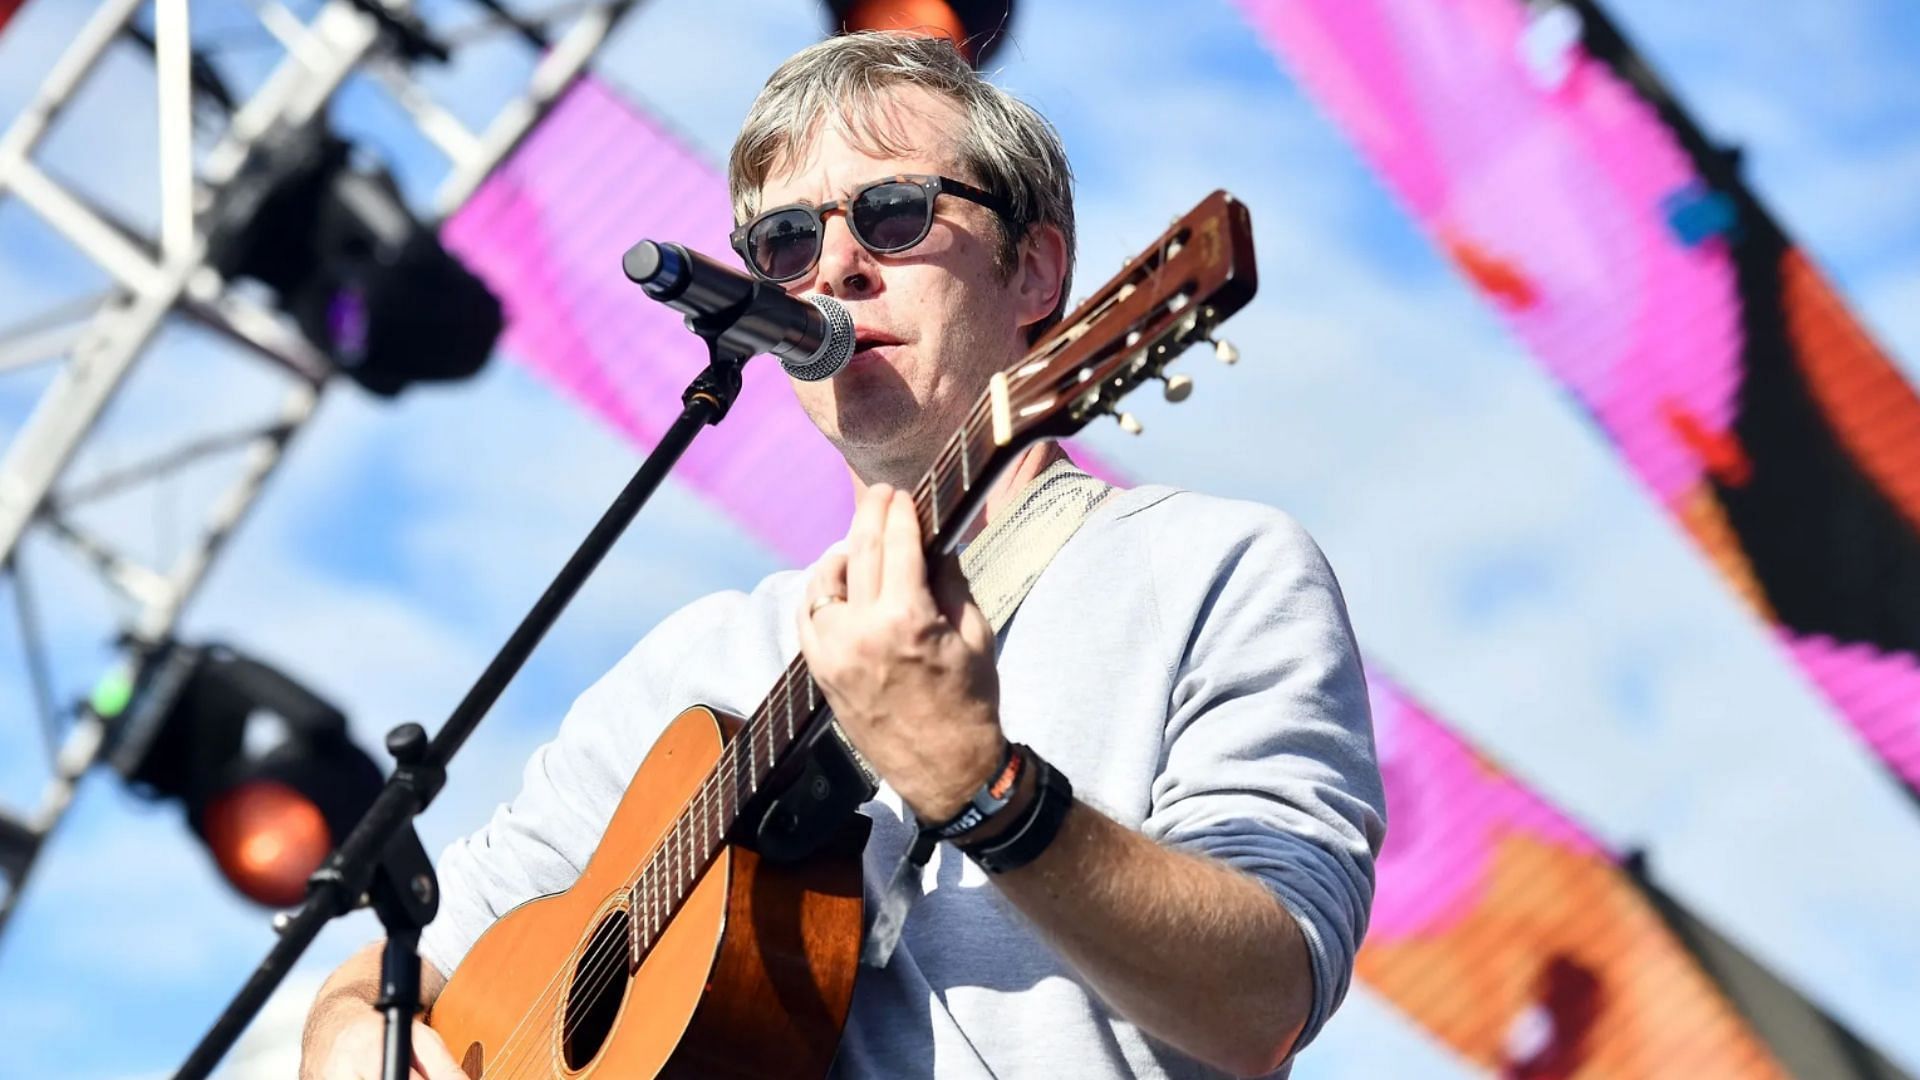 Bill Callahan Tour 2023 Tickets, where to buy, dates, venues, and more